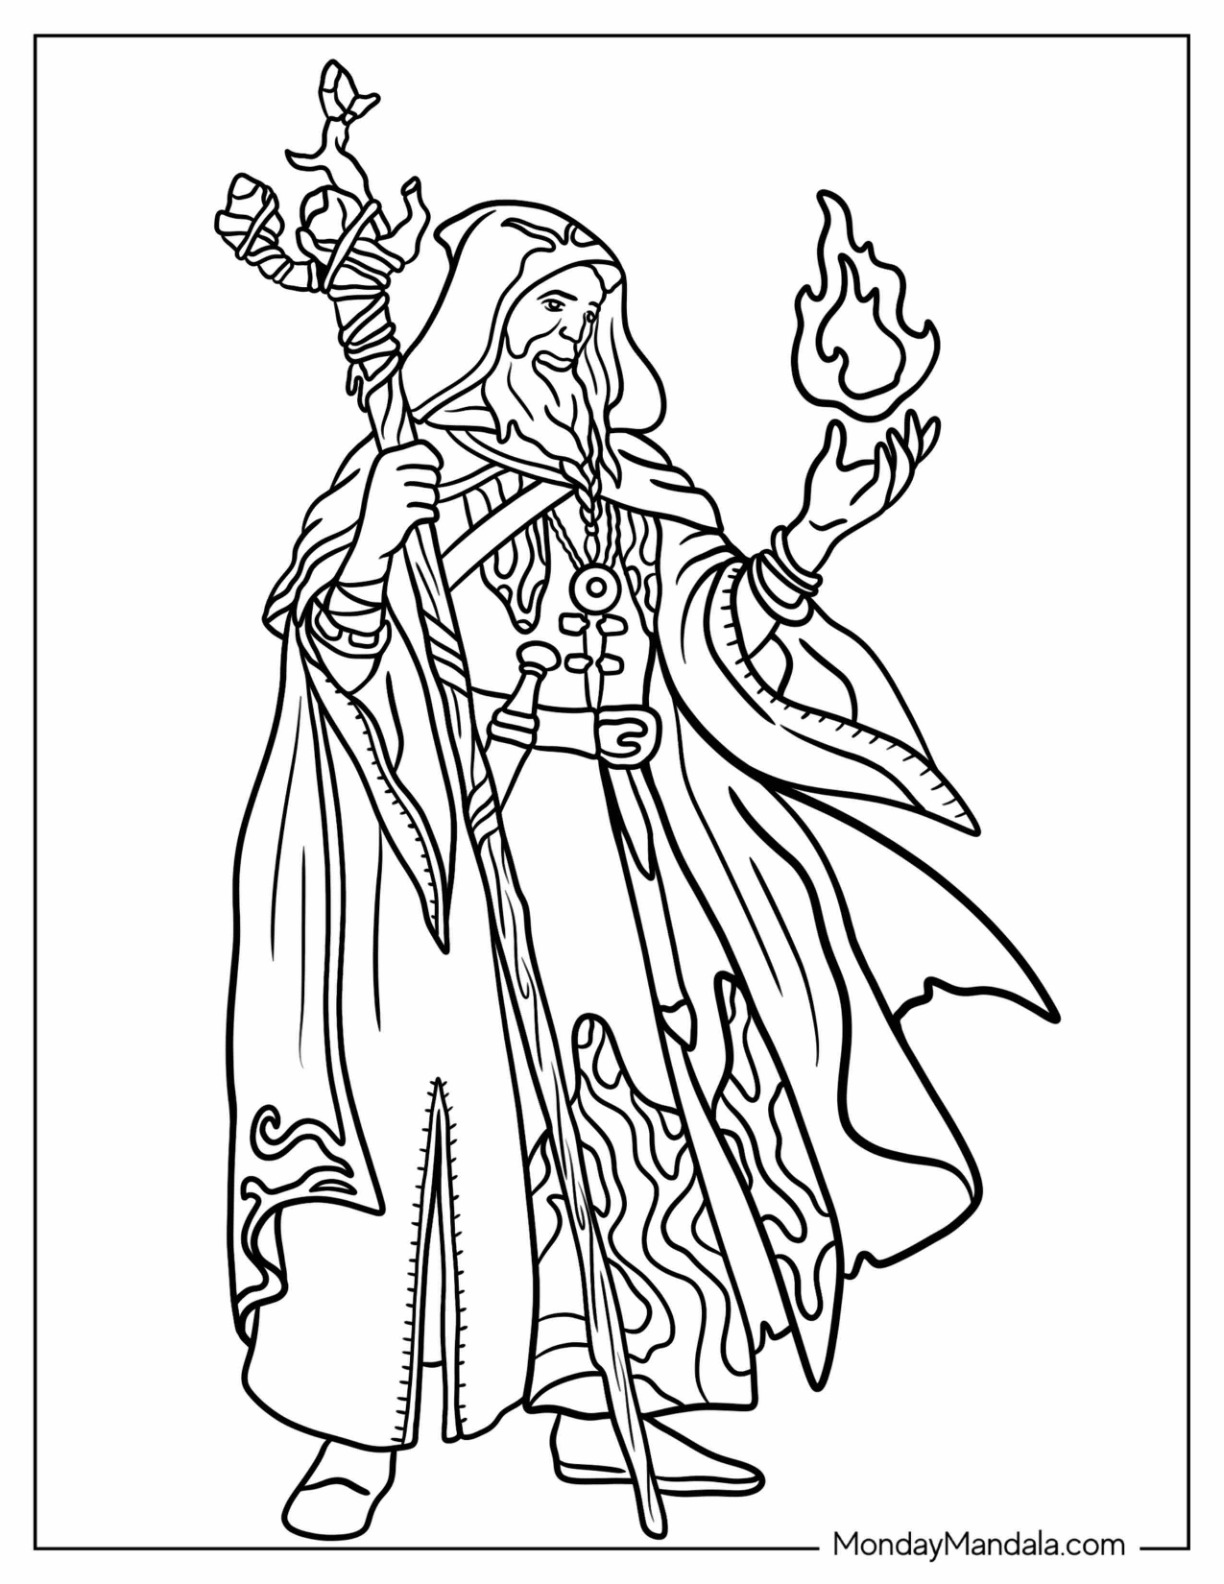 Dungeons dragons coloring pages free printables